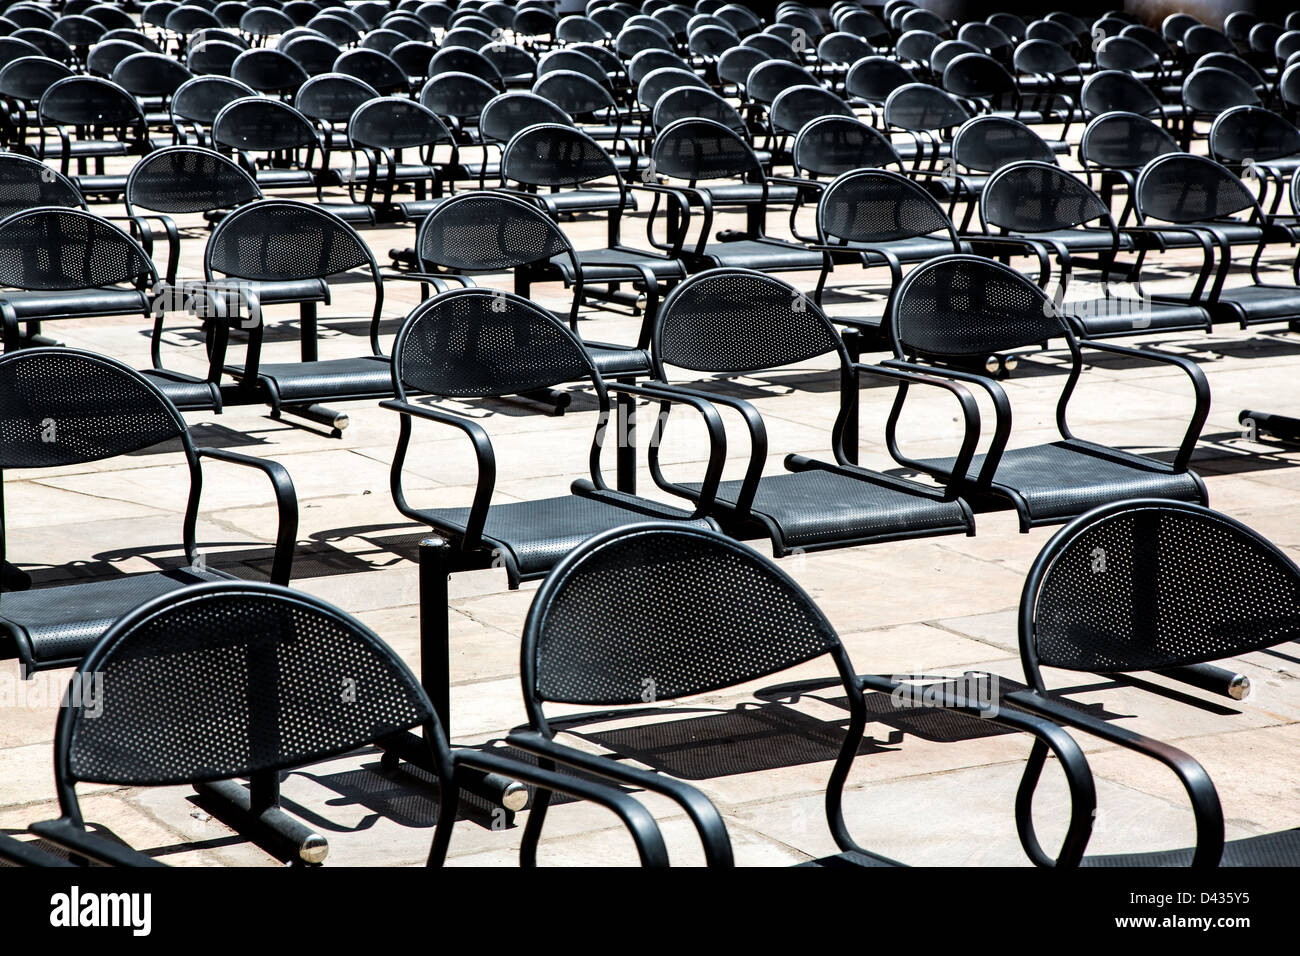 empty chairs standing in a row Stock Photo